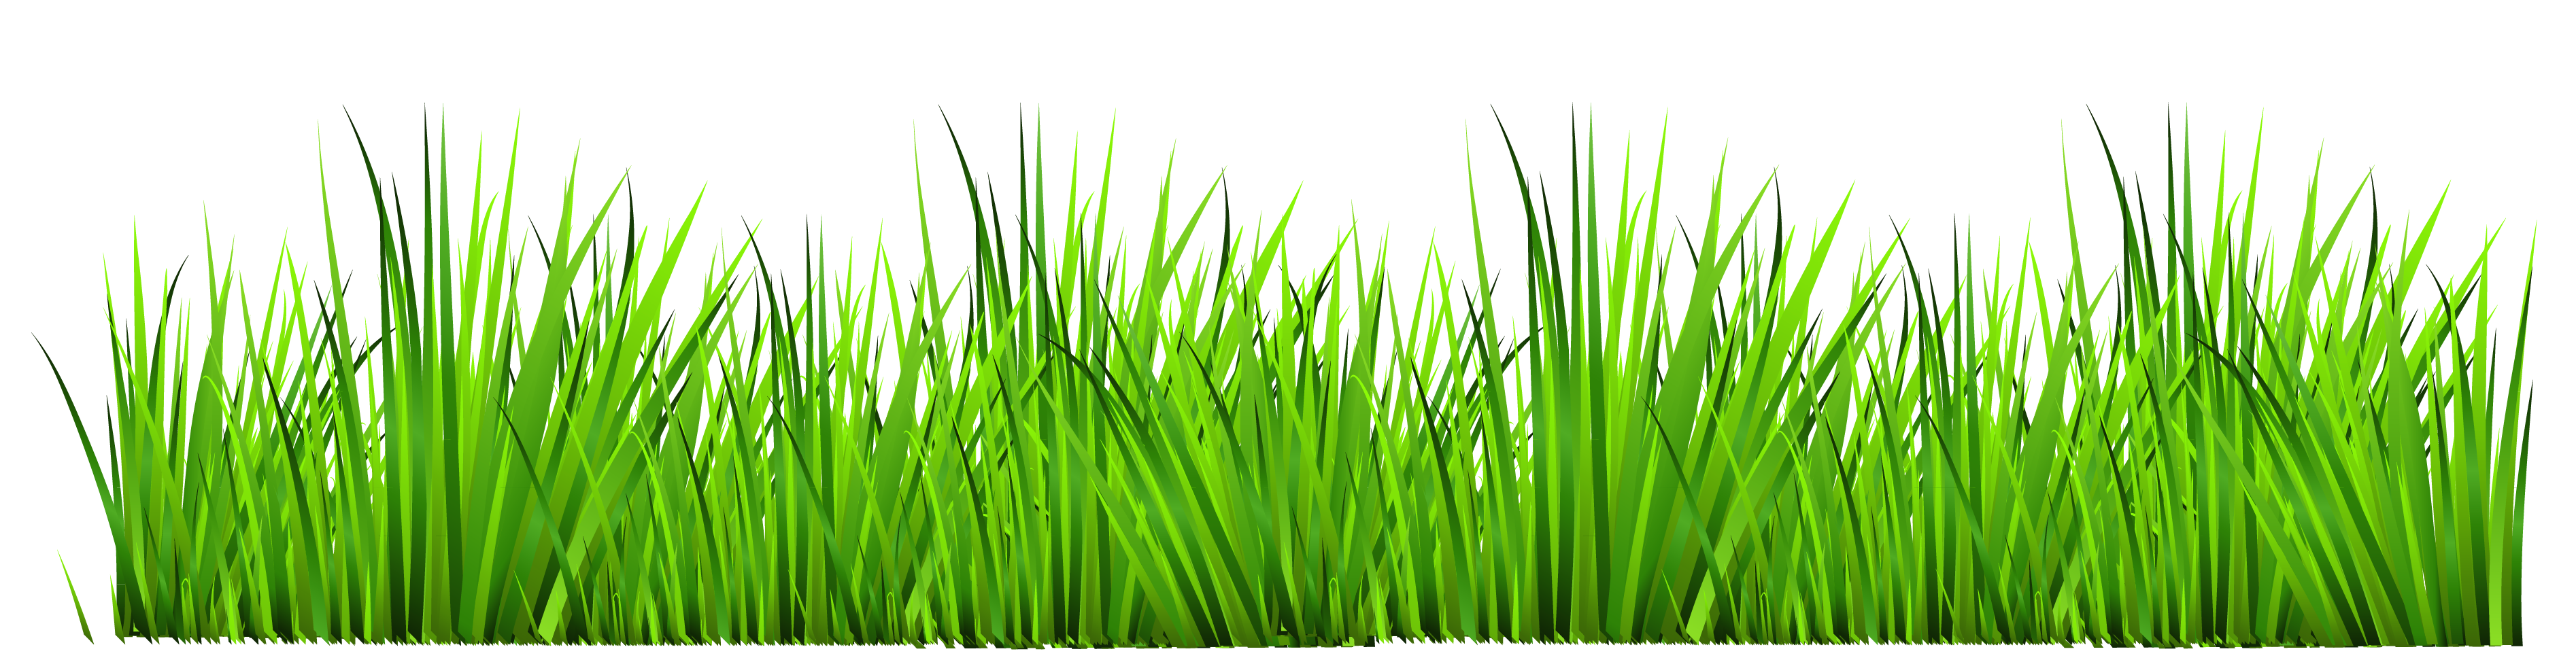 png clipart grass - photo #3